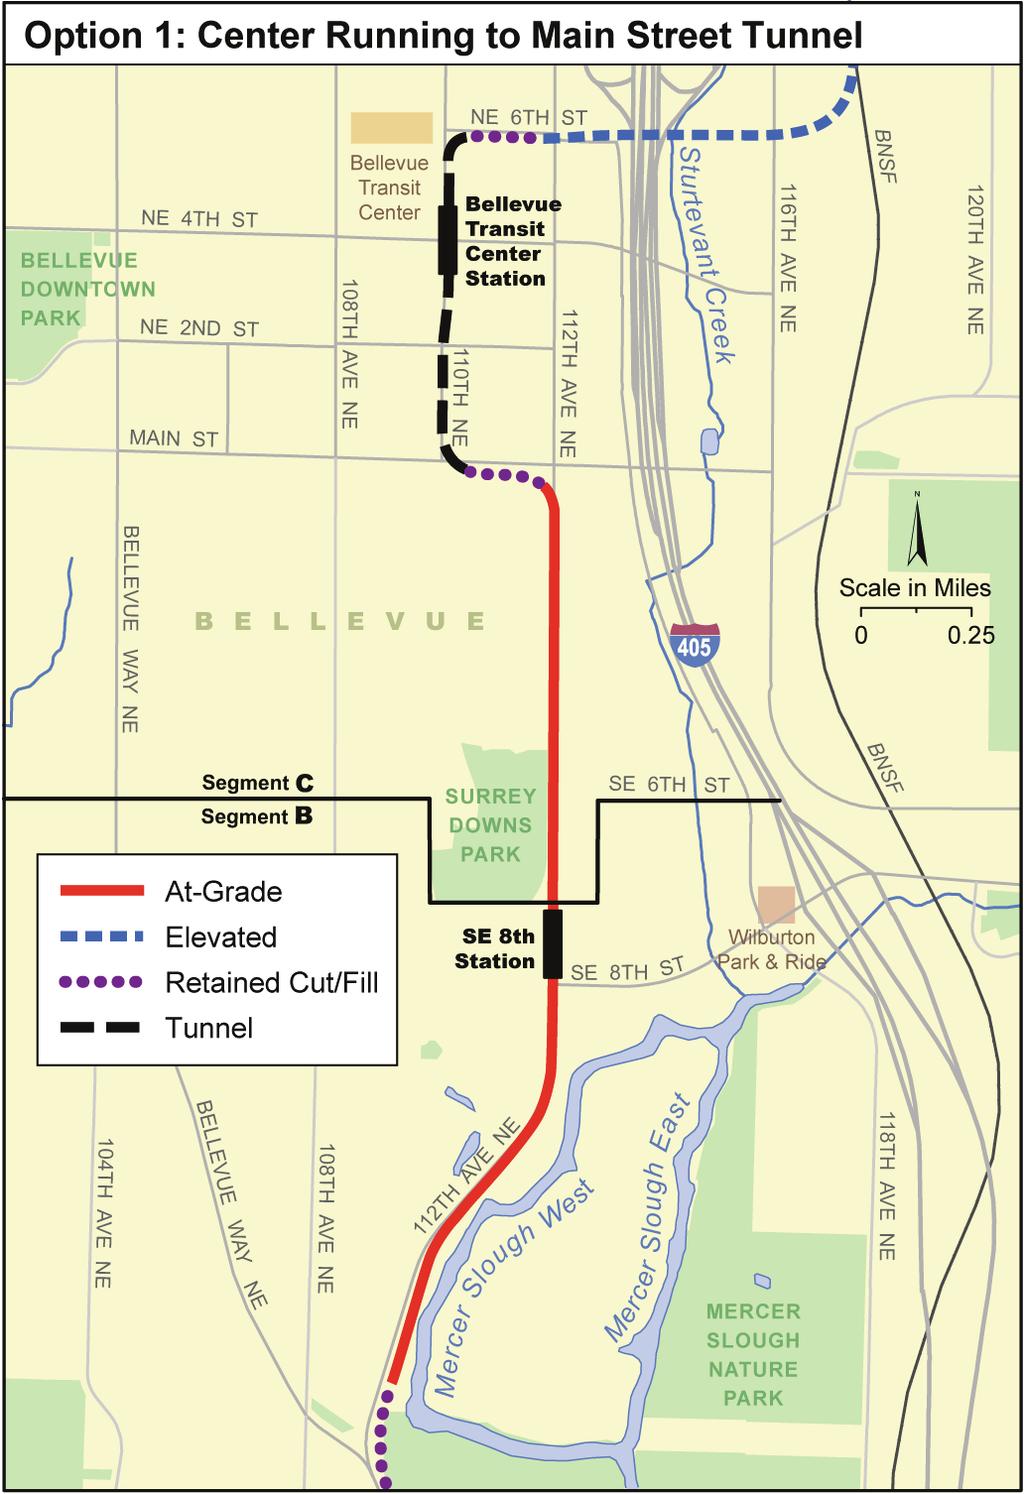 Evaluation Summary by Option Option 1: Center Running to Main Street Tunnel Transportation Like the other center-running alignments where vehicles can only cross the tracks at signalized